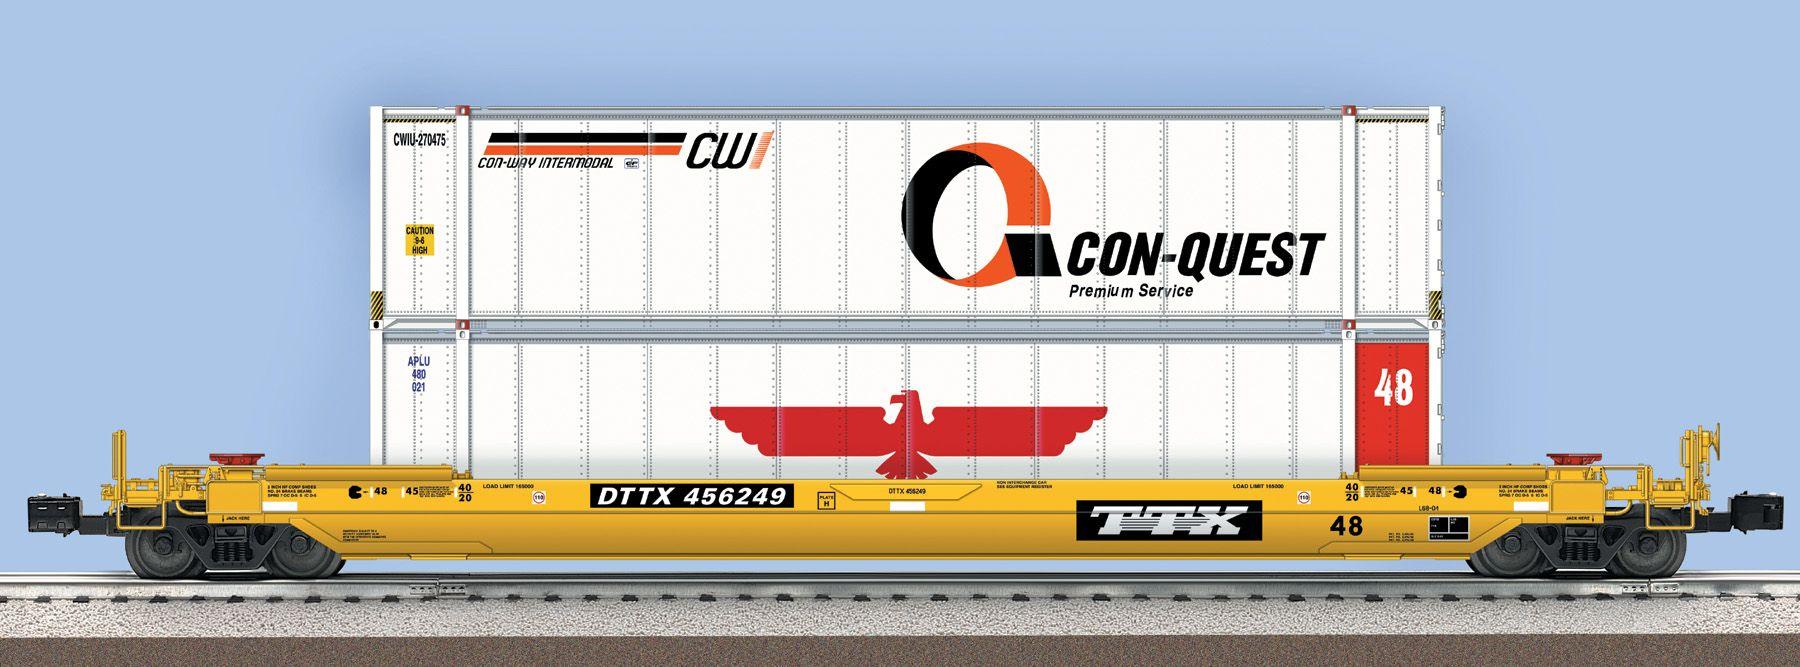 TTX Train Logo - Freight Car Friday – The Many Faces of Trailer Train | Lionel Trains